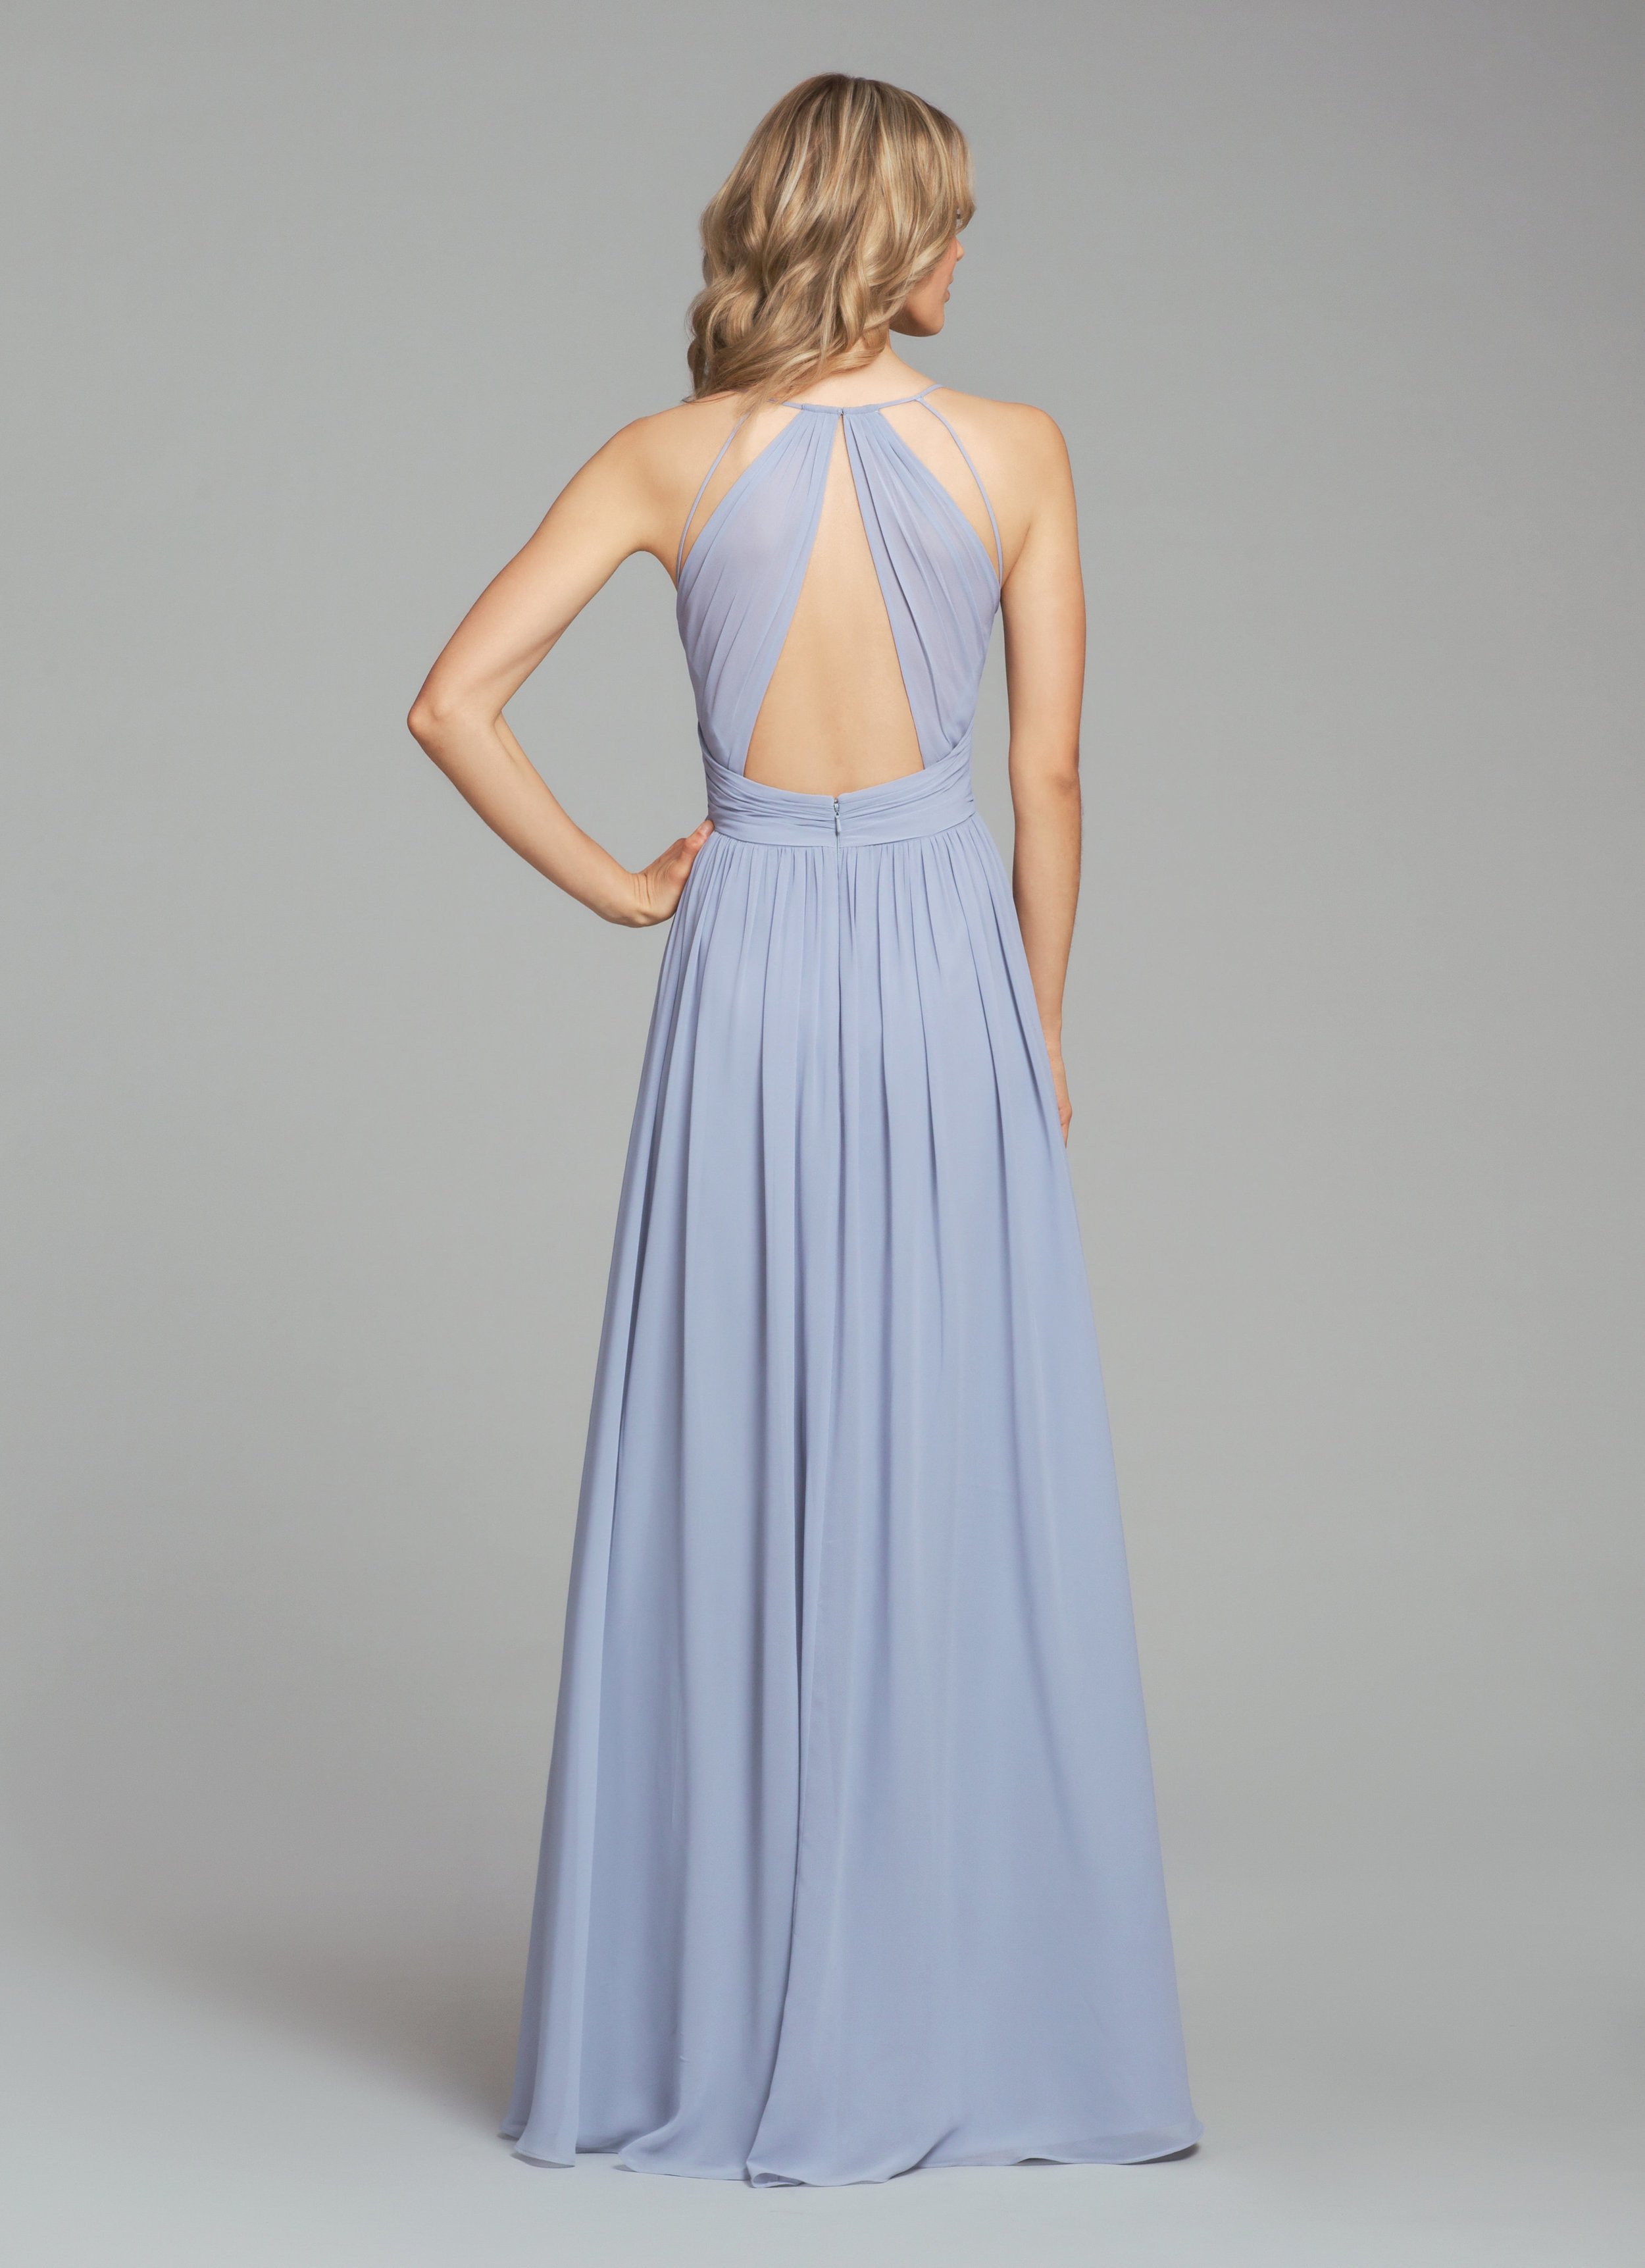 hayley-paige-occasions-bridesmaids-fall-2018-style-5855_2.jpg